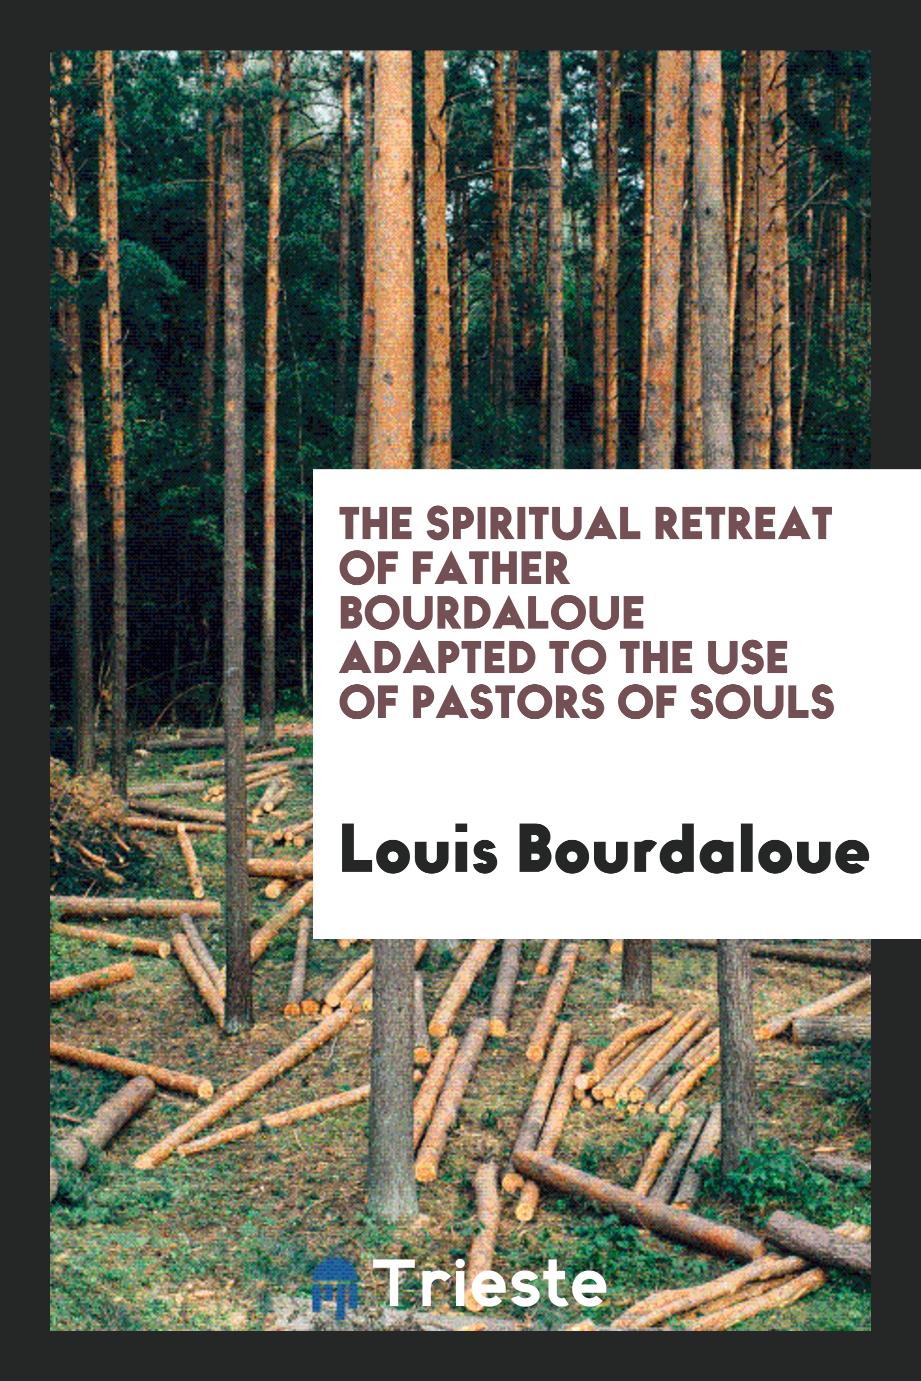 The Spiritual retreat of Father Bourdaloue adapted to the use of pastors of souls